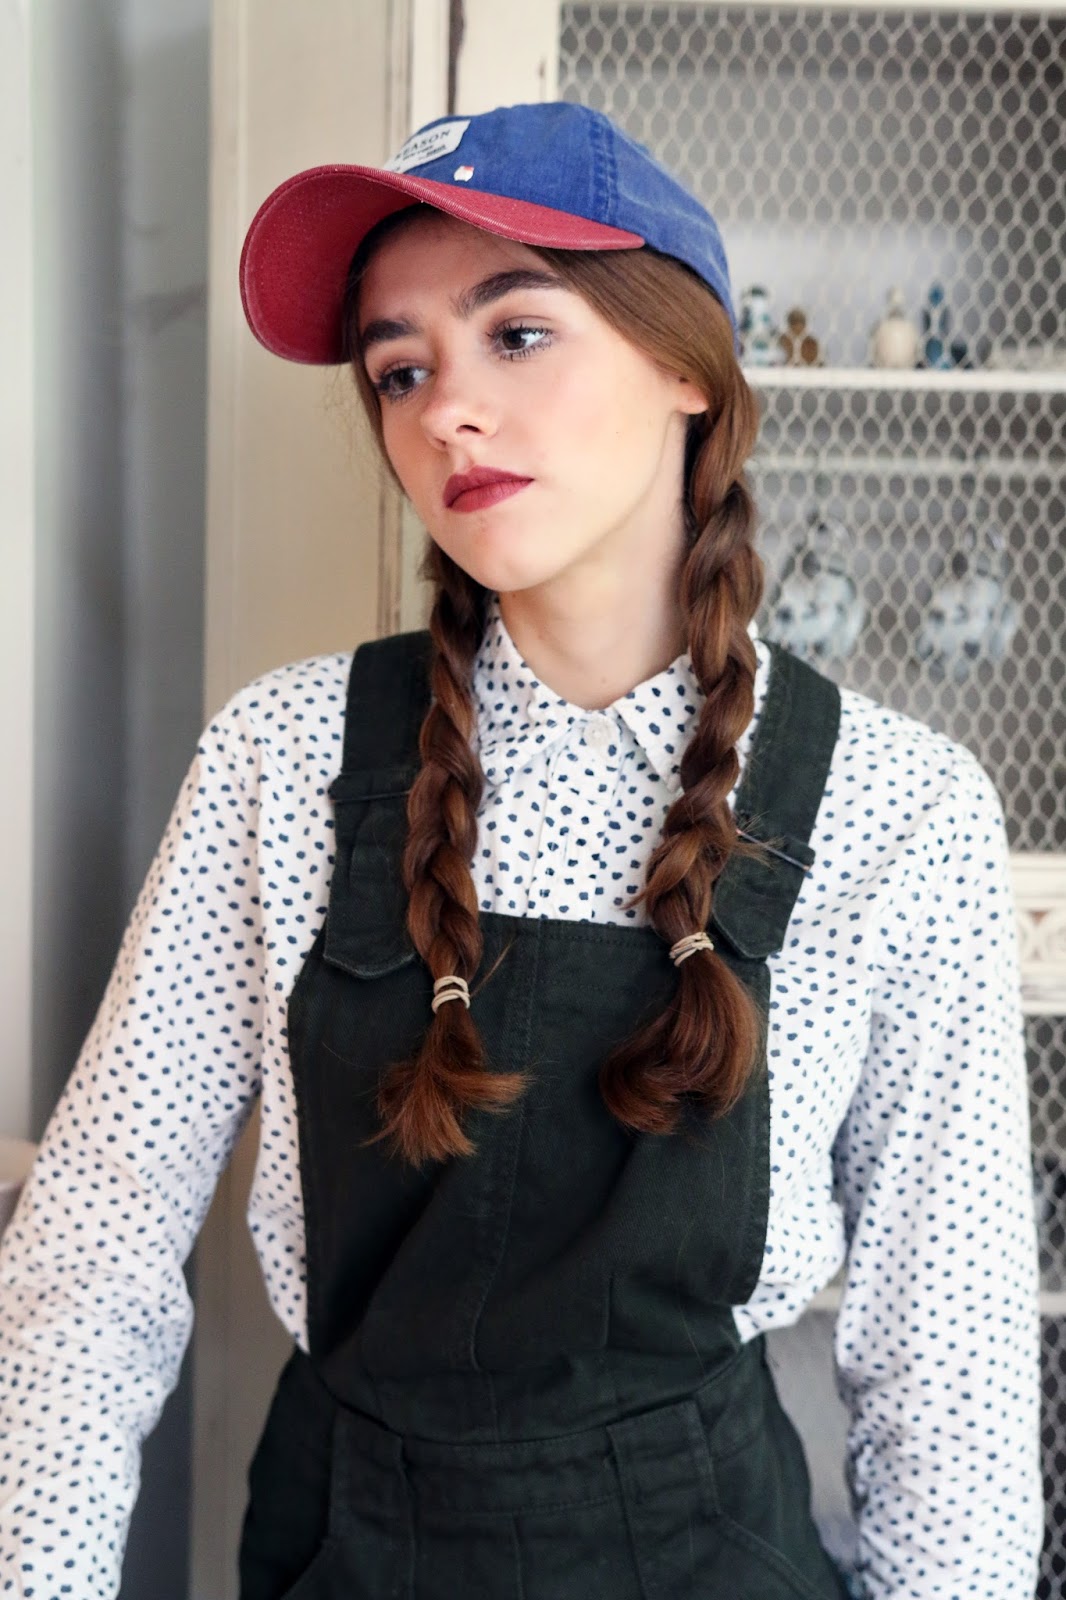 Alice in Wonderland,plaits,  Amelia, Mandeville, Jumpsuit, Mandeville Sisters, eyebrows, Blog, funny, fashion, comedy, jumpsuit, boiler suit, OOTD, Blogger, comment, witty, author, writing, Urban Outfitters, hat, cap, dungarees, dress, shirt, blouse.